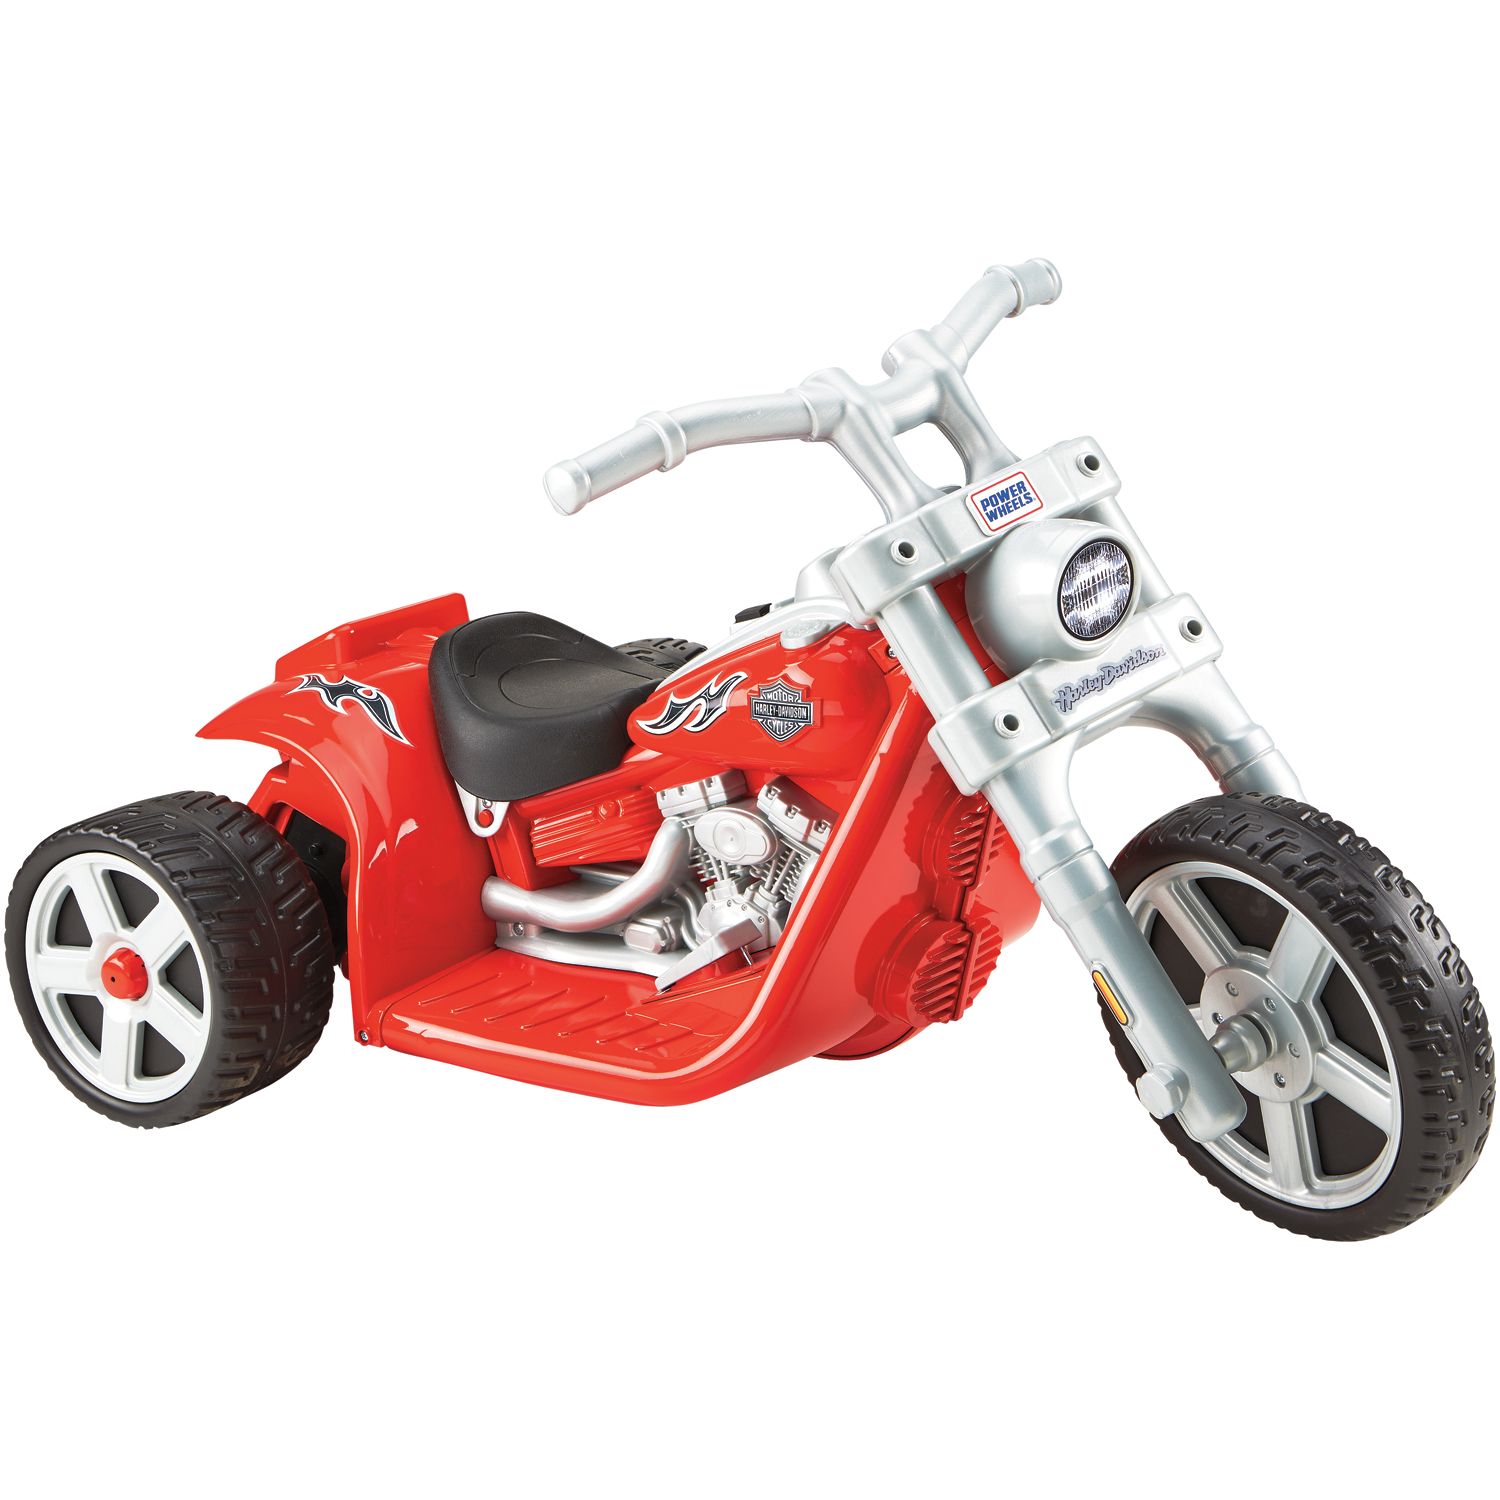 fisher price harley tricycle